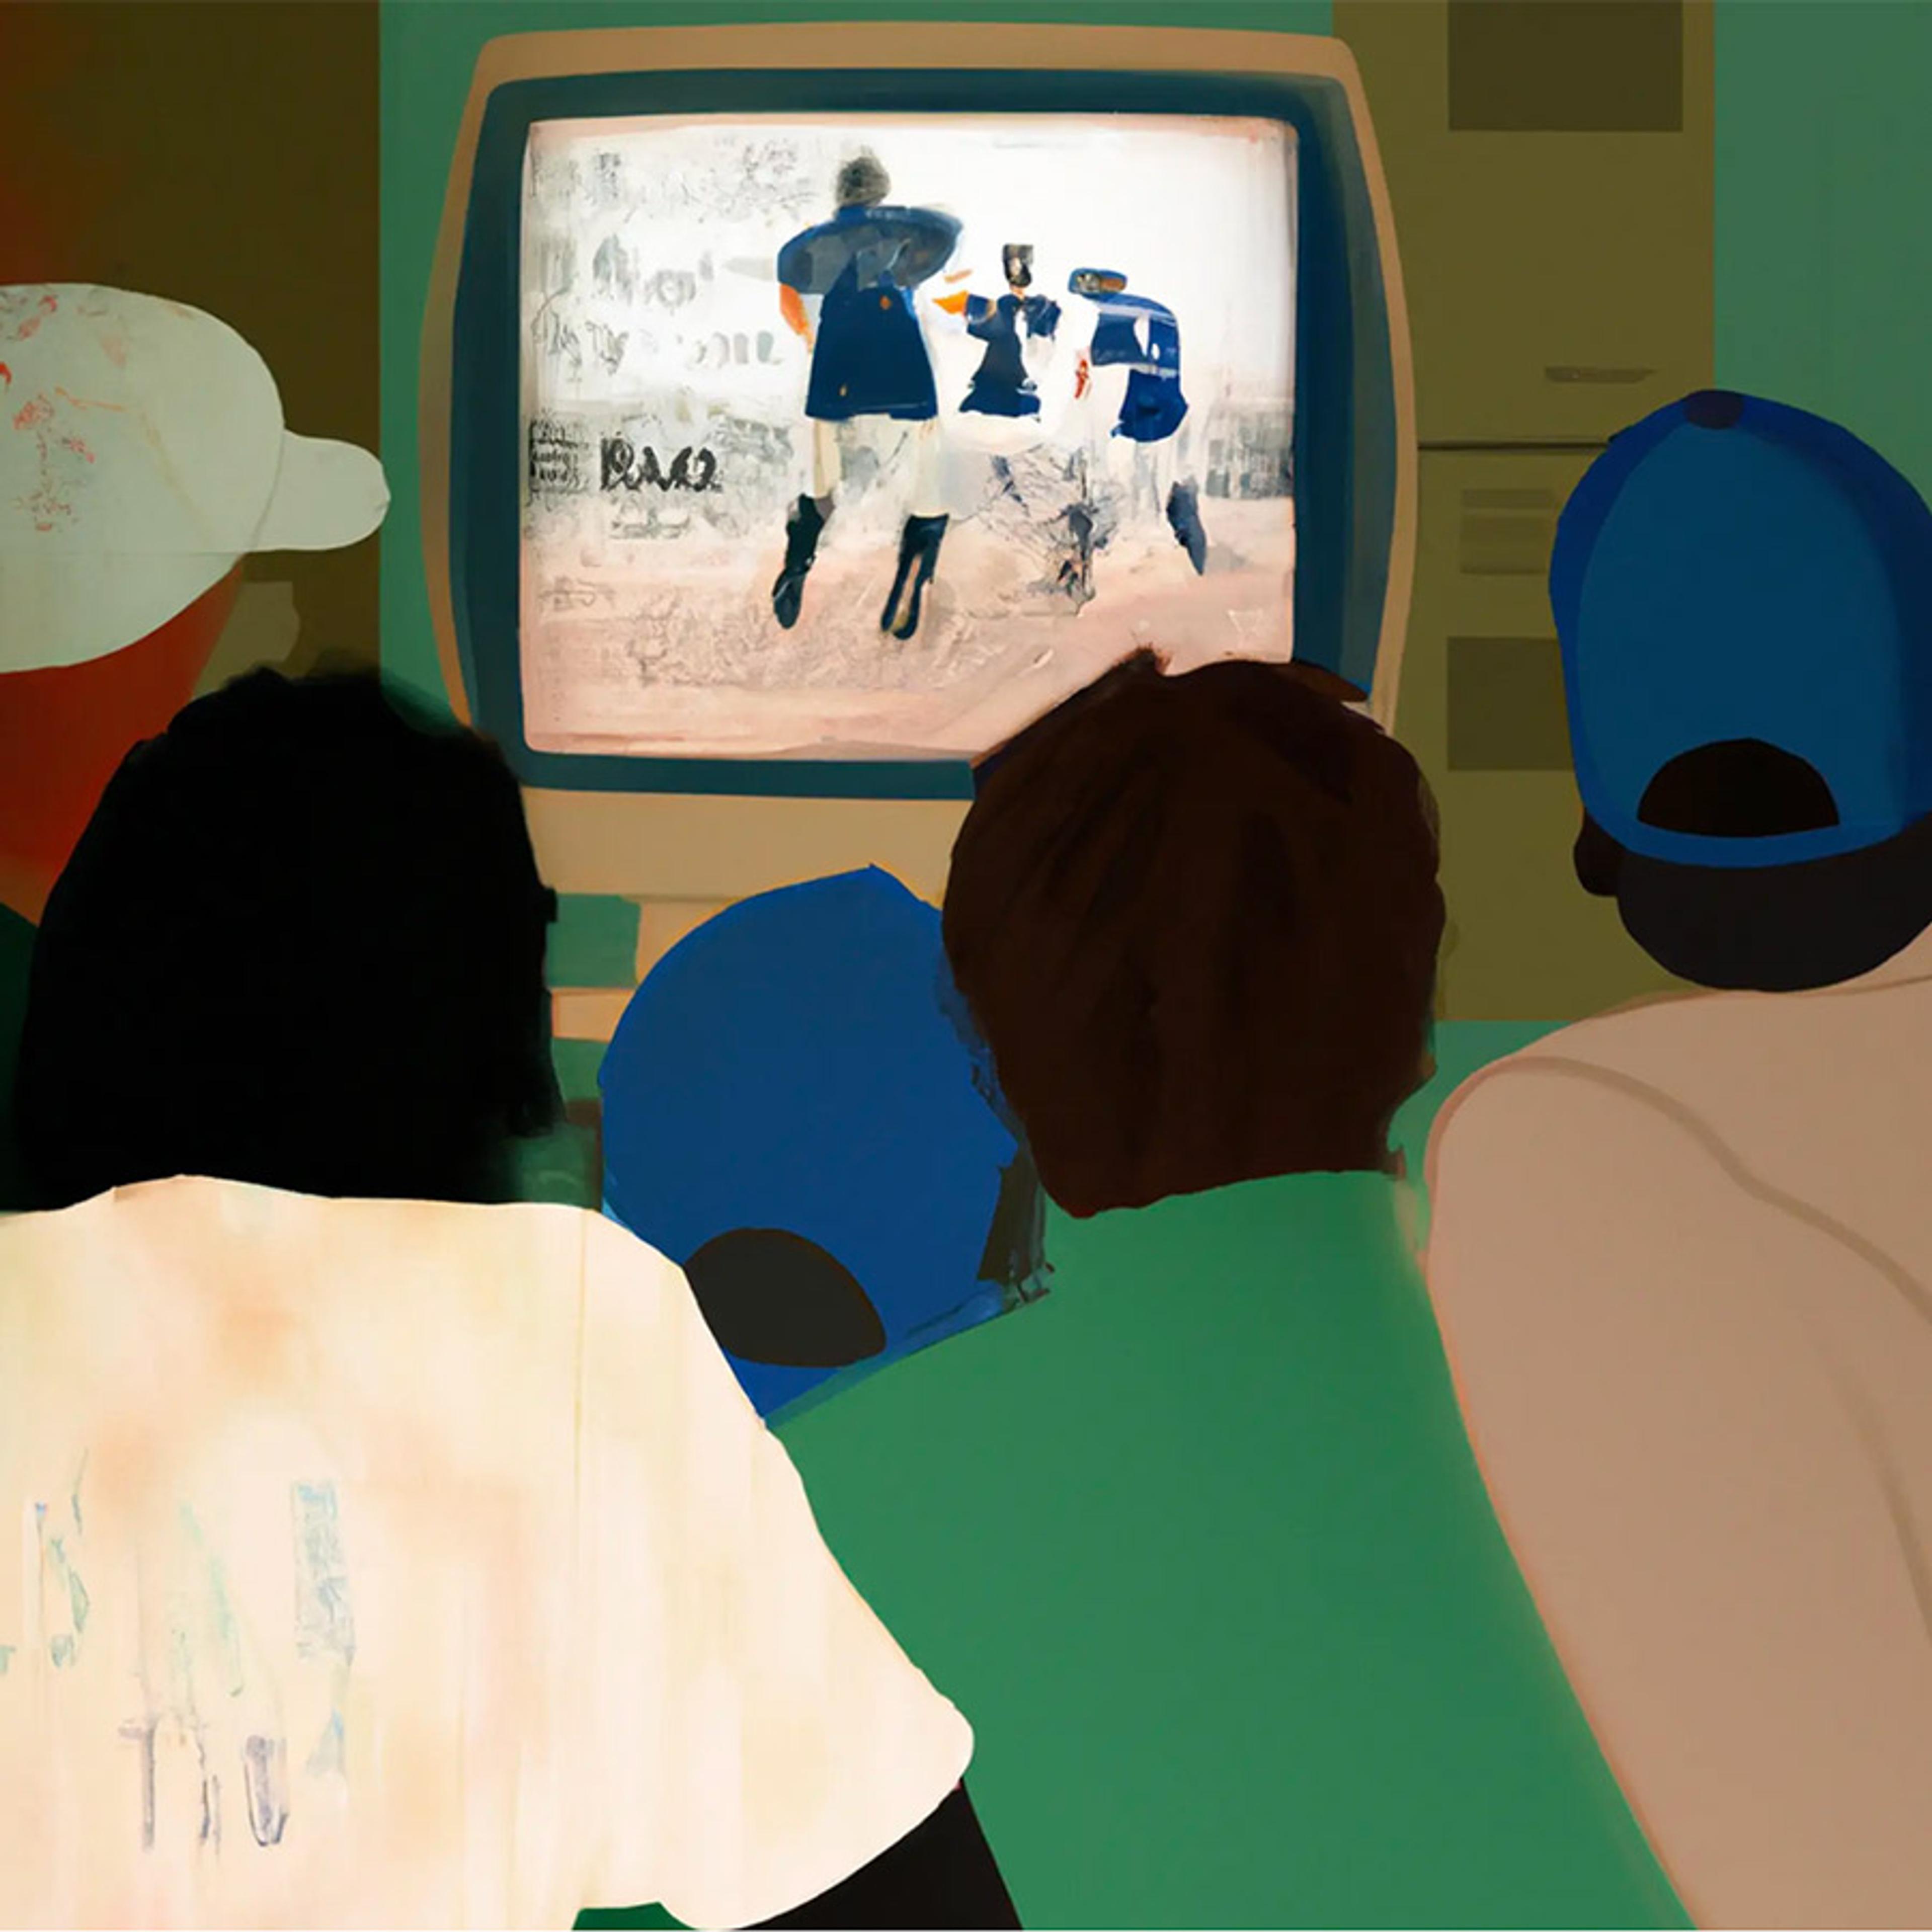 Set in the 2000s, a rear view of a group of baseball fanatics, huddled around a computer, watching a baseball game, abstract art